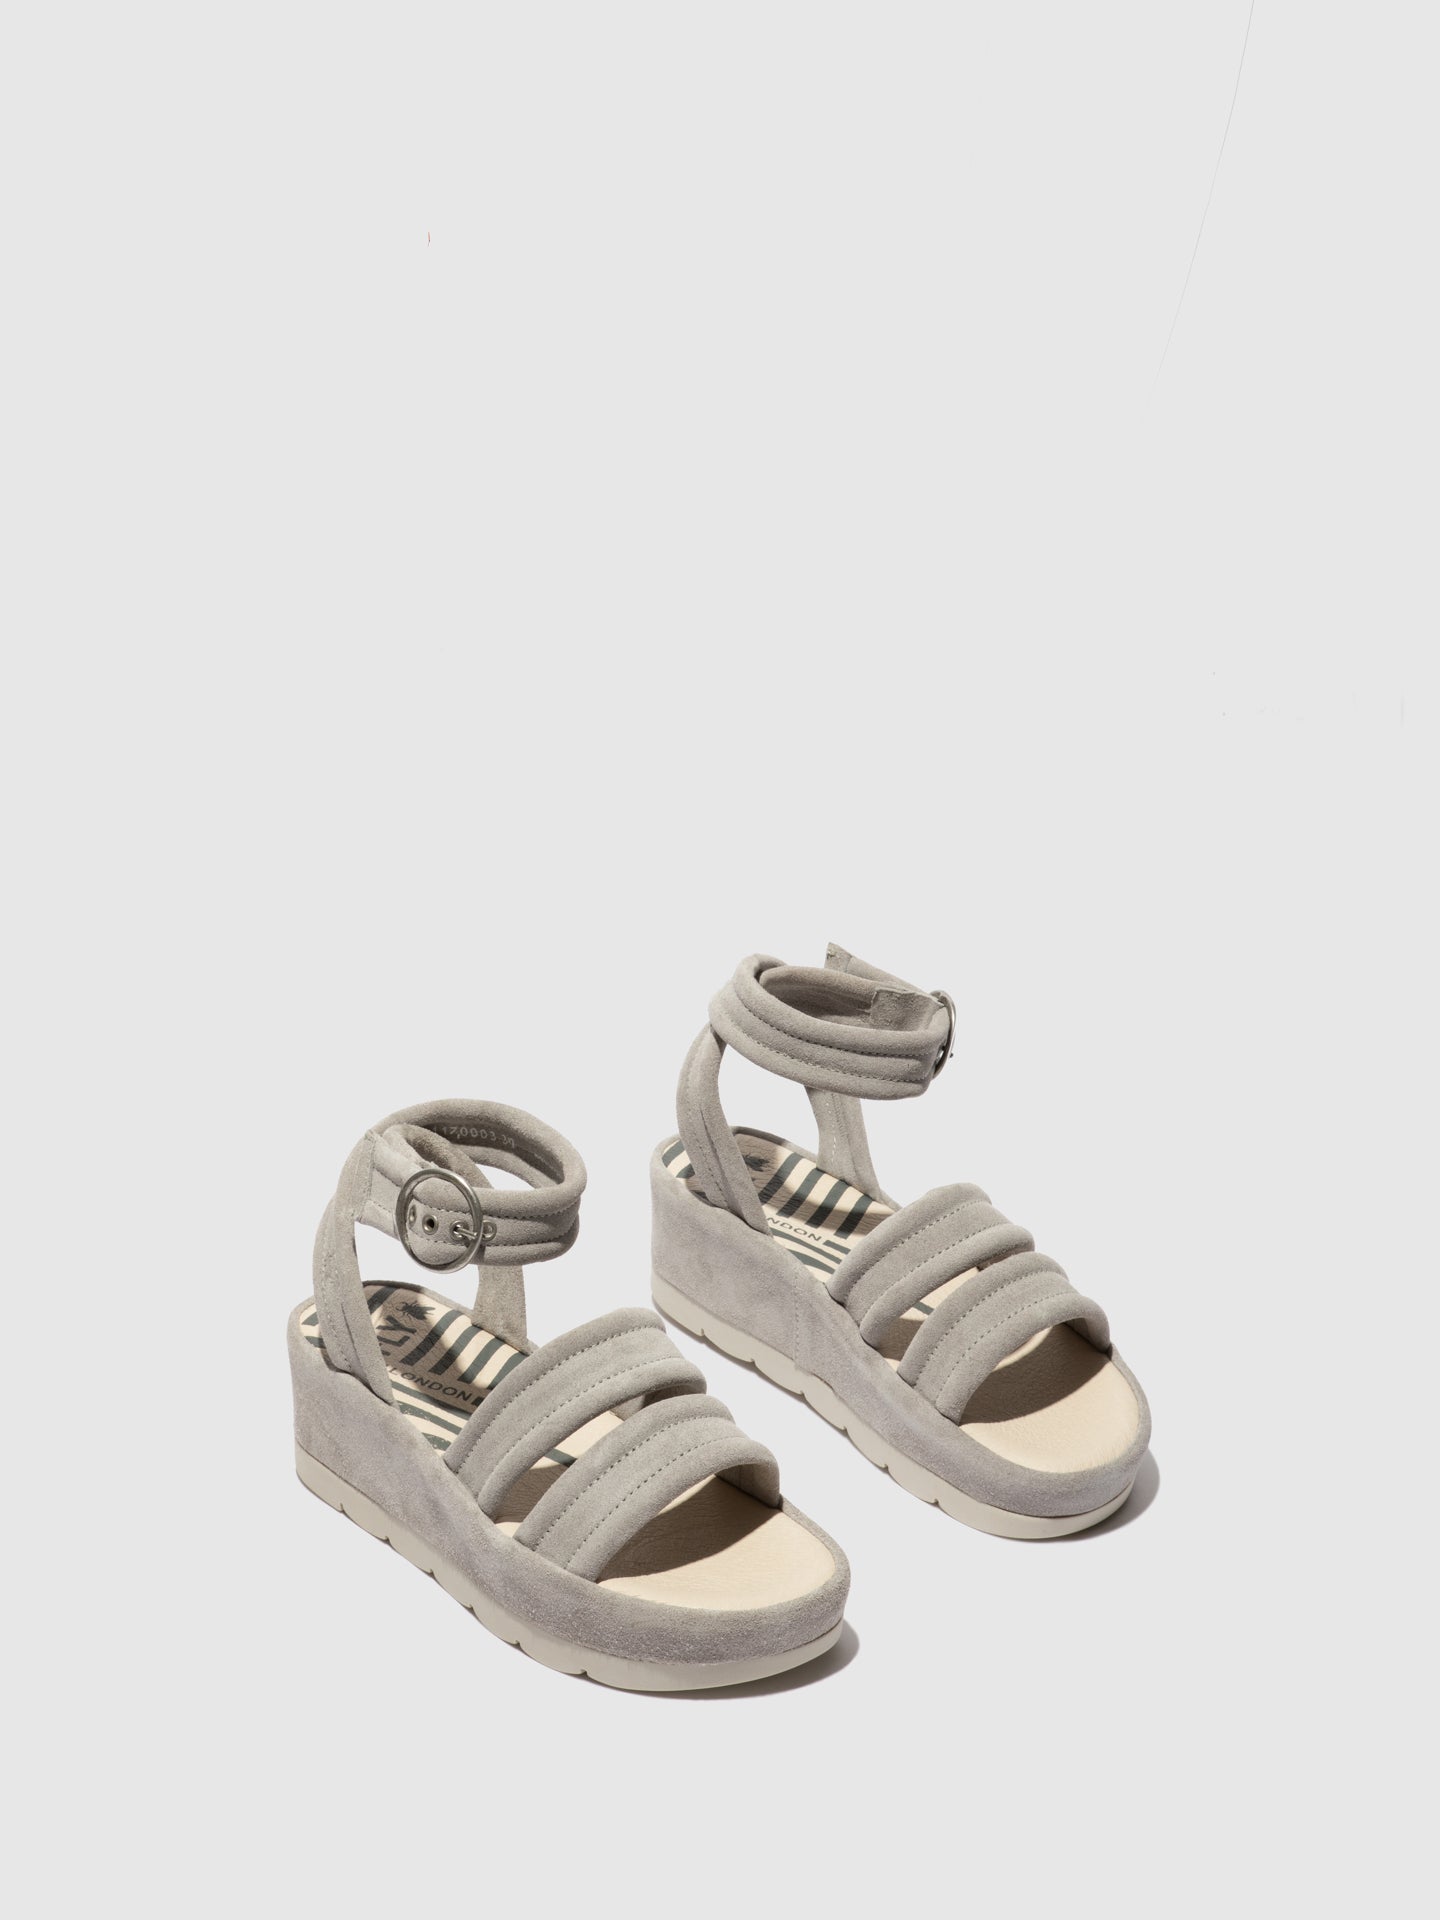 Fly London Ankle Strap Sandals BAGI170FLY CONCRETE